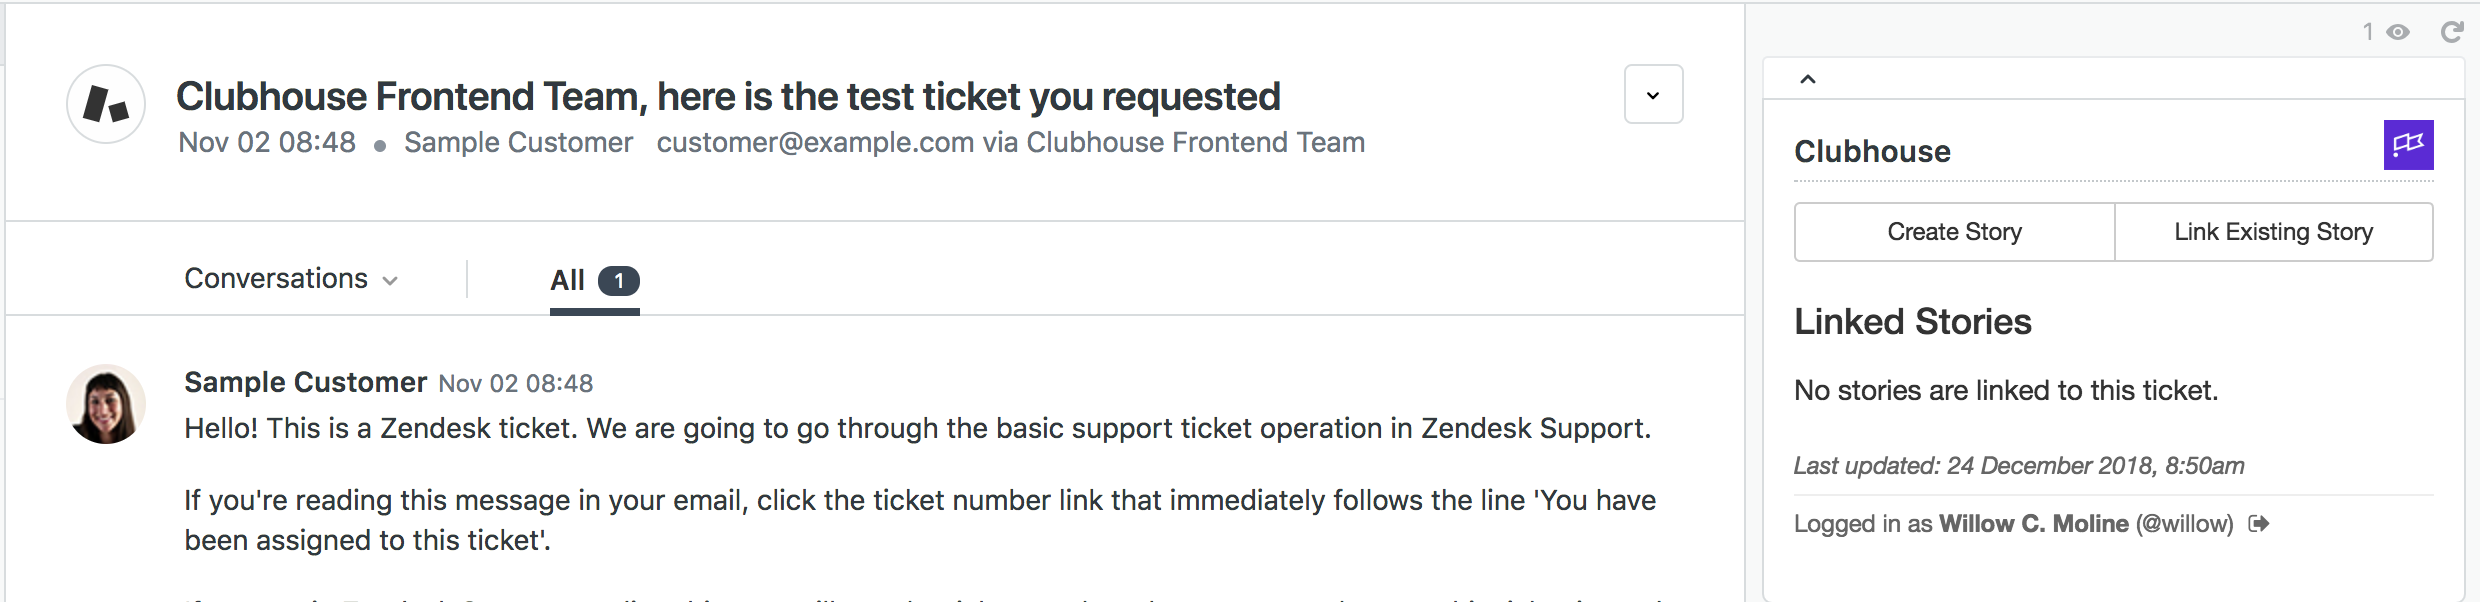 Clubhouse_Zendesk_Example_Ticket.png